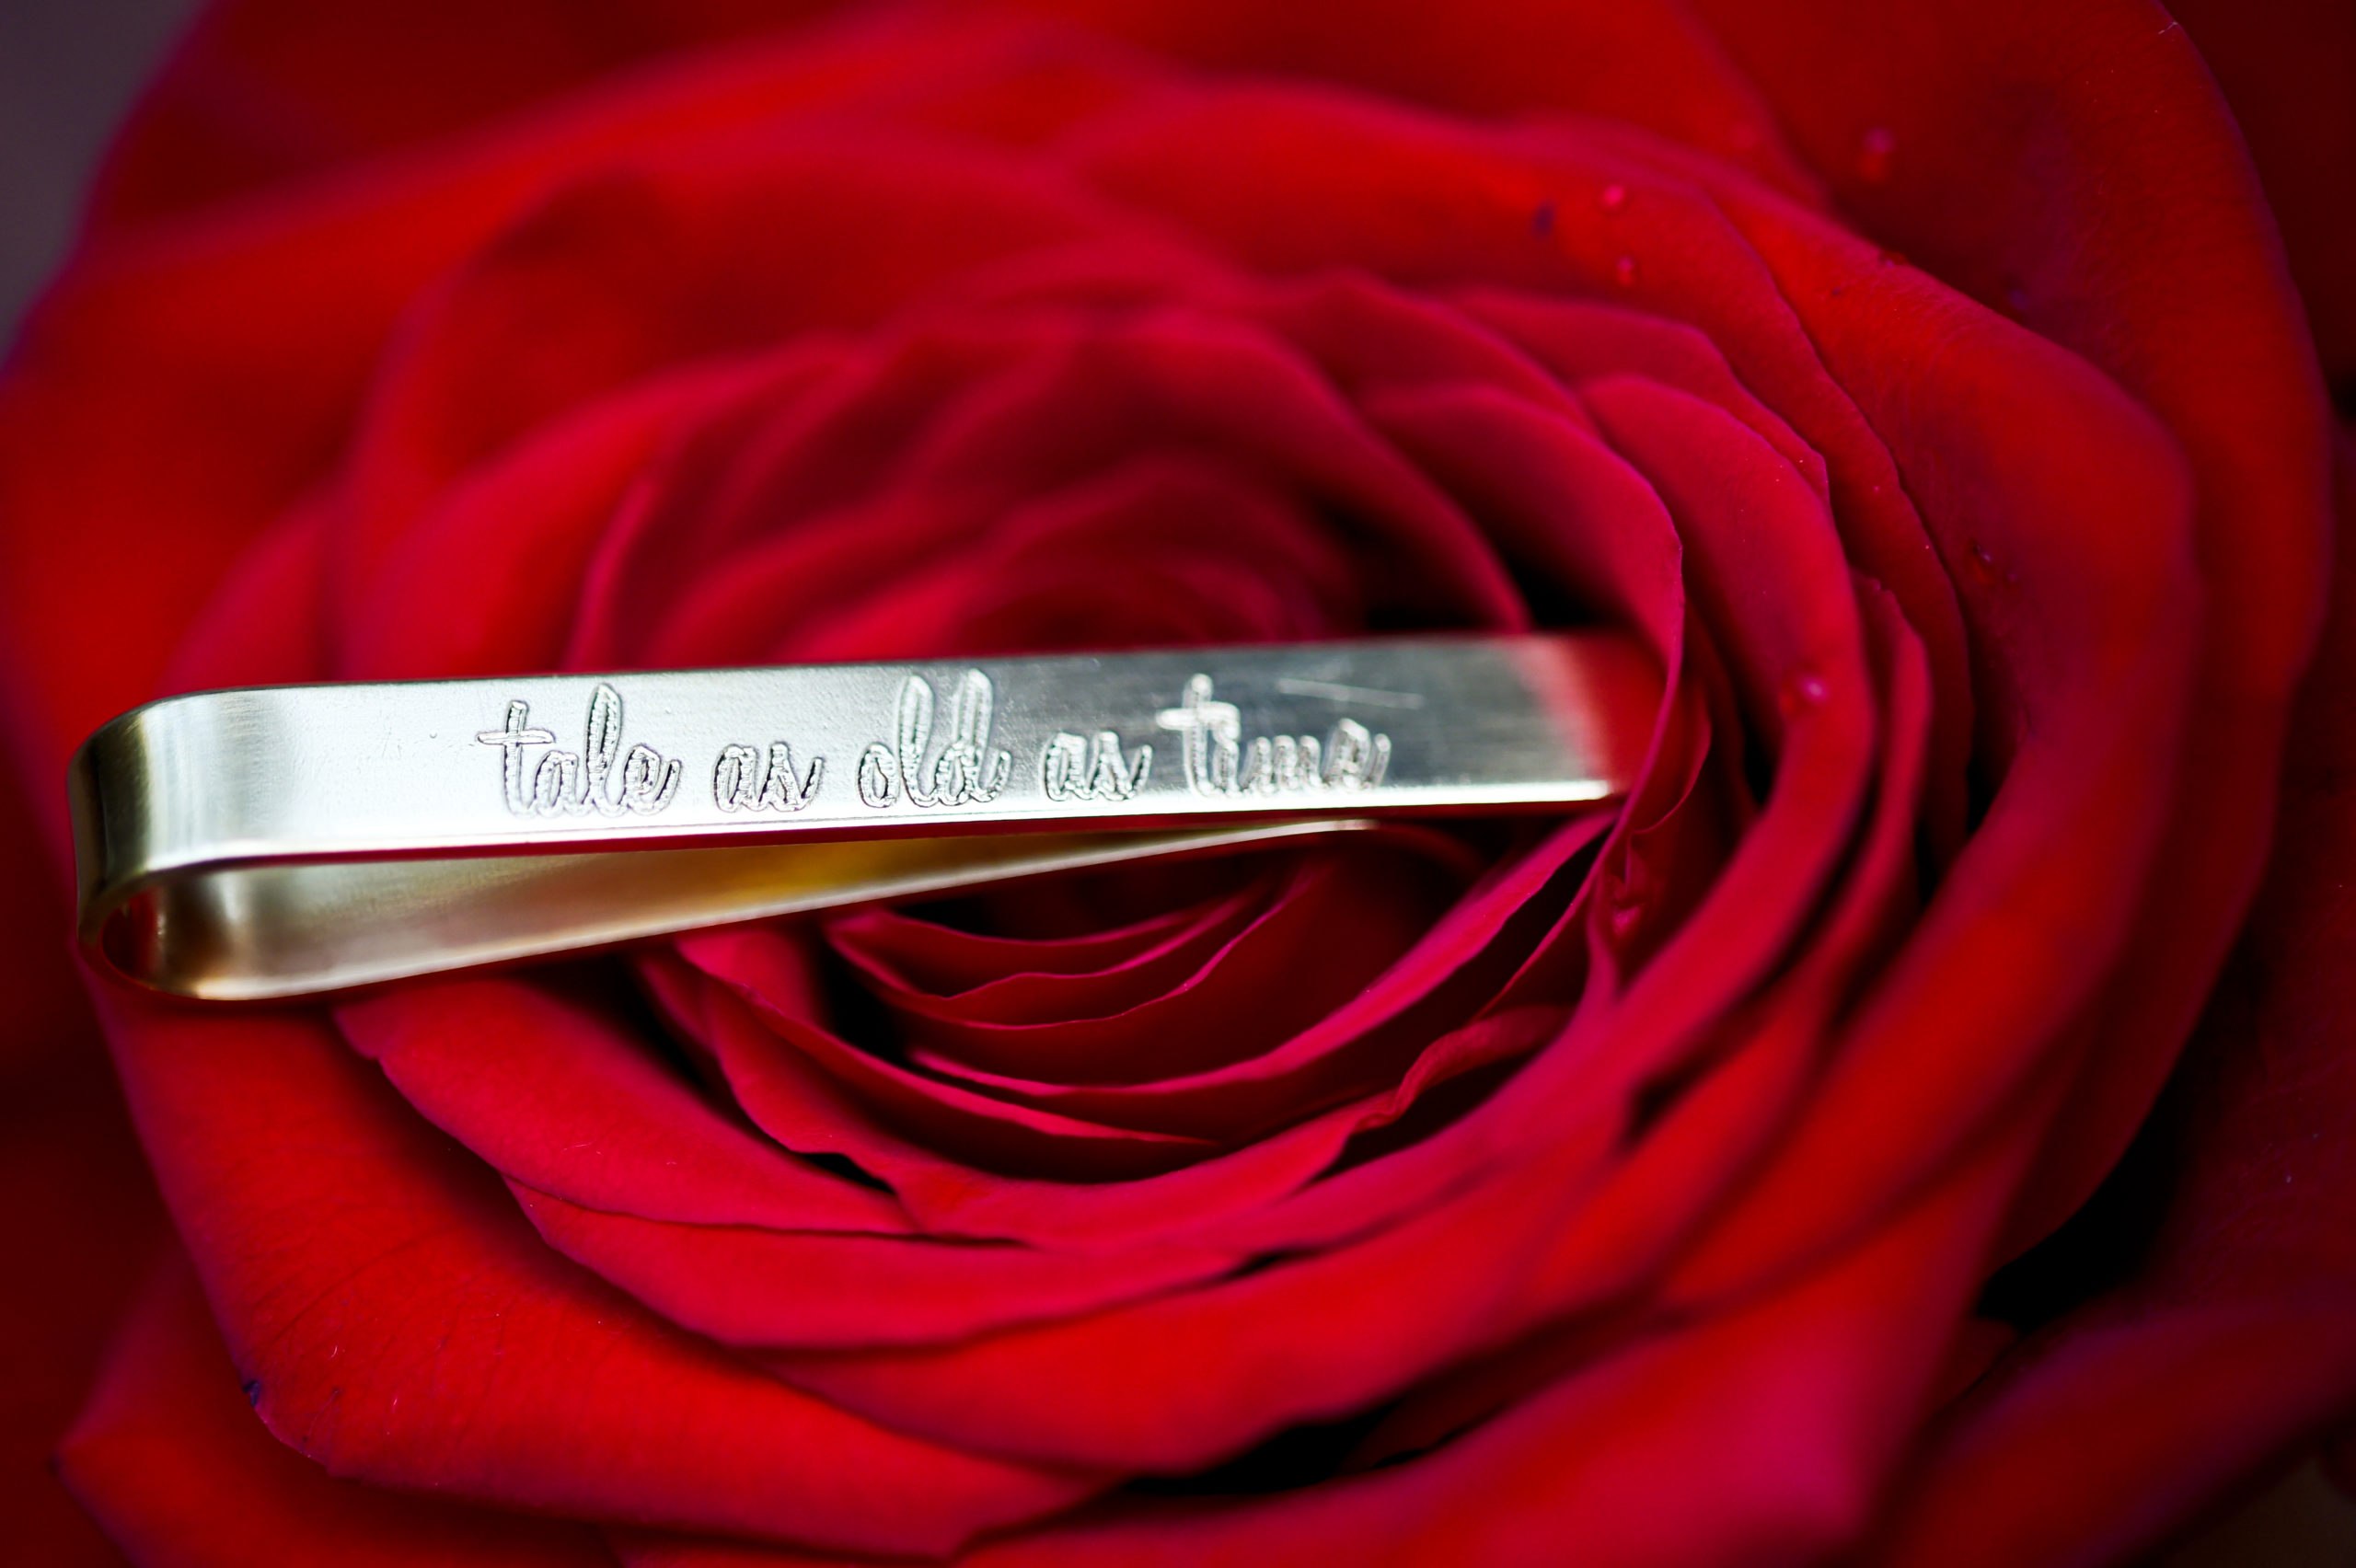 Ways to incorporate Disney wedding ideas into your big day. The Beauty and the Beast wedding featured hidden details like the "Tale as old as time" tie clip!